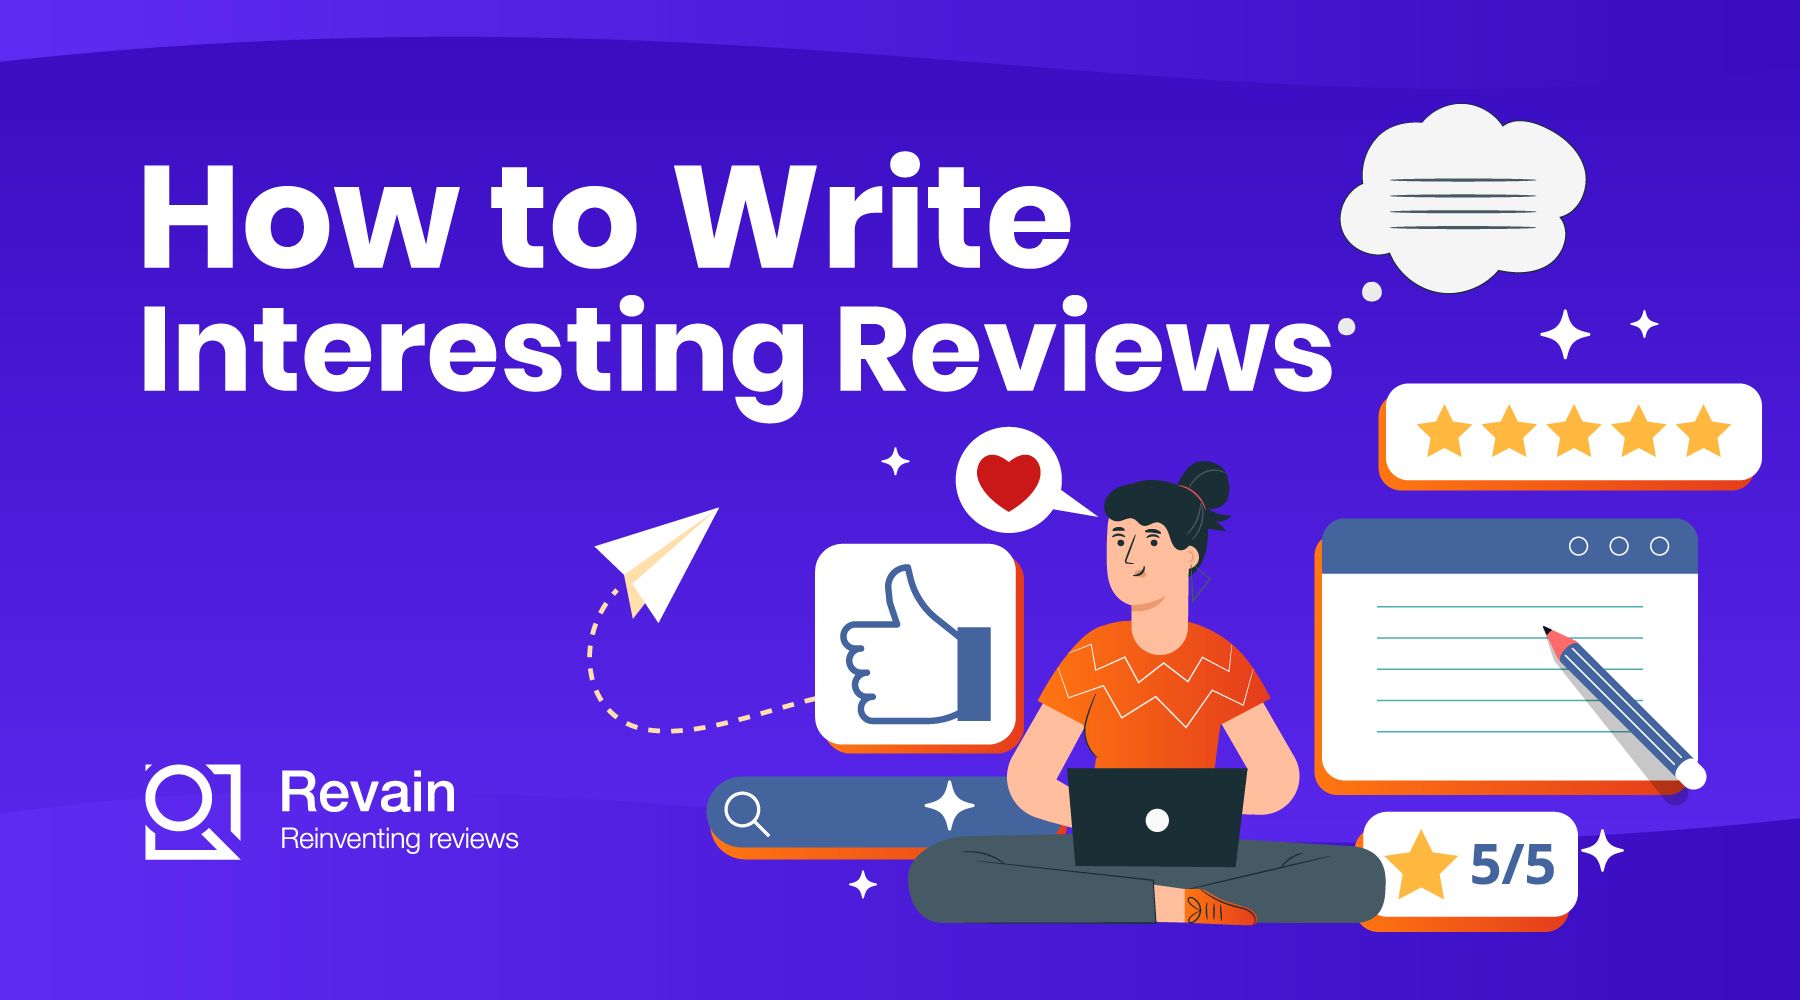 How to write interesting reviews